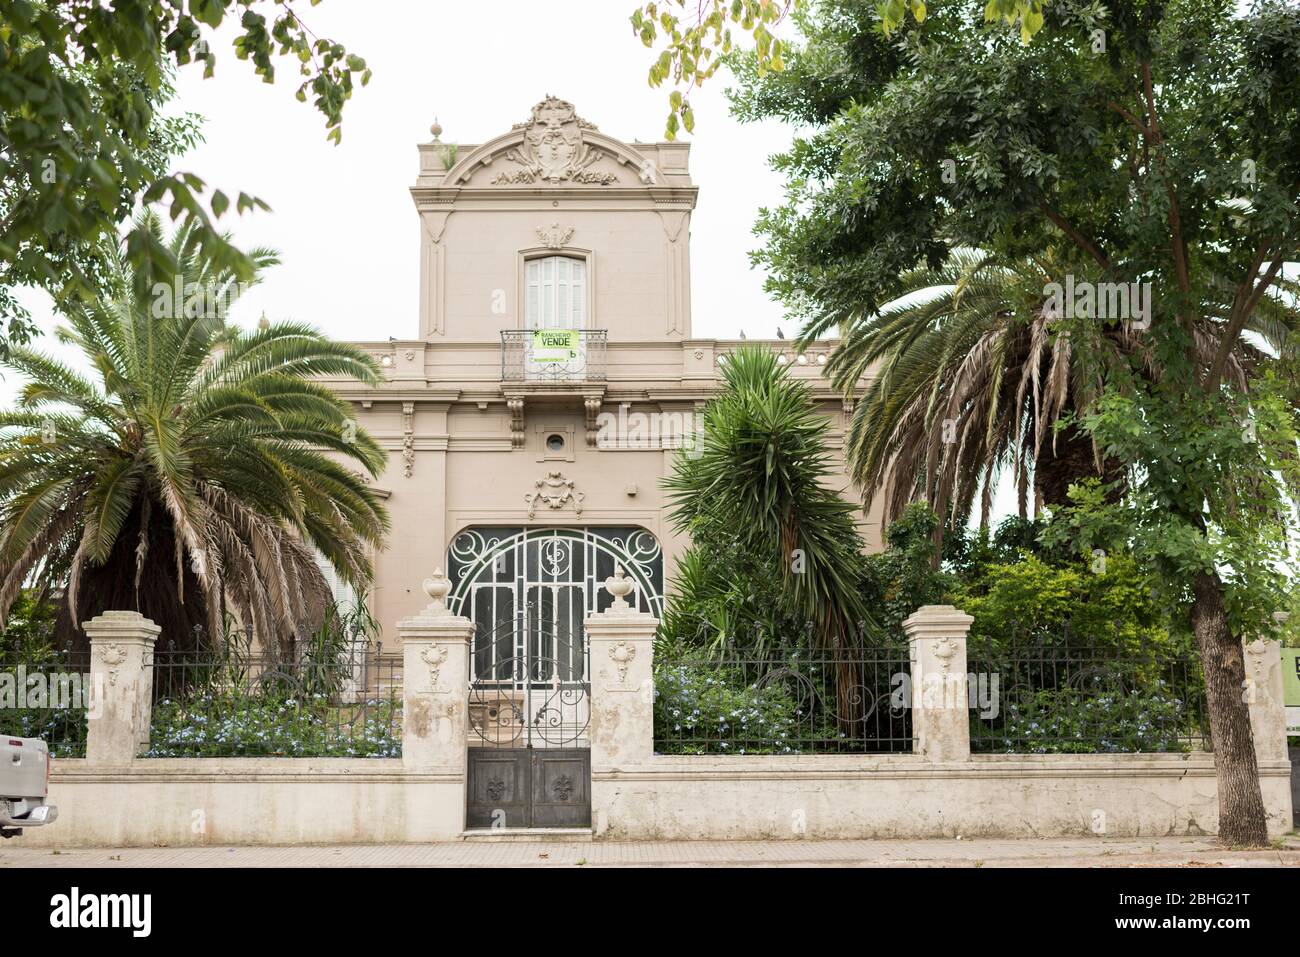 Carmelo, Colonia / Uruguay; Dec 27, 2018: Old mansion in one of the streets surrounding Plaza Artigas; It is unoccupied, with signs of being for sale Stock Photo